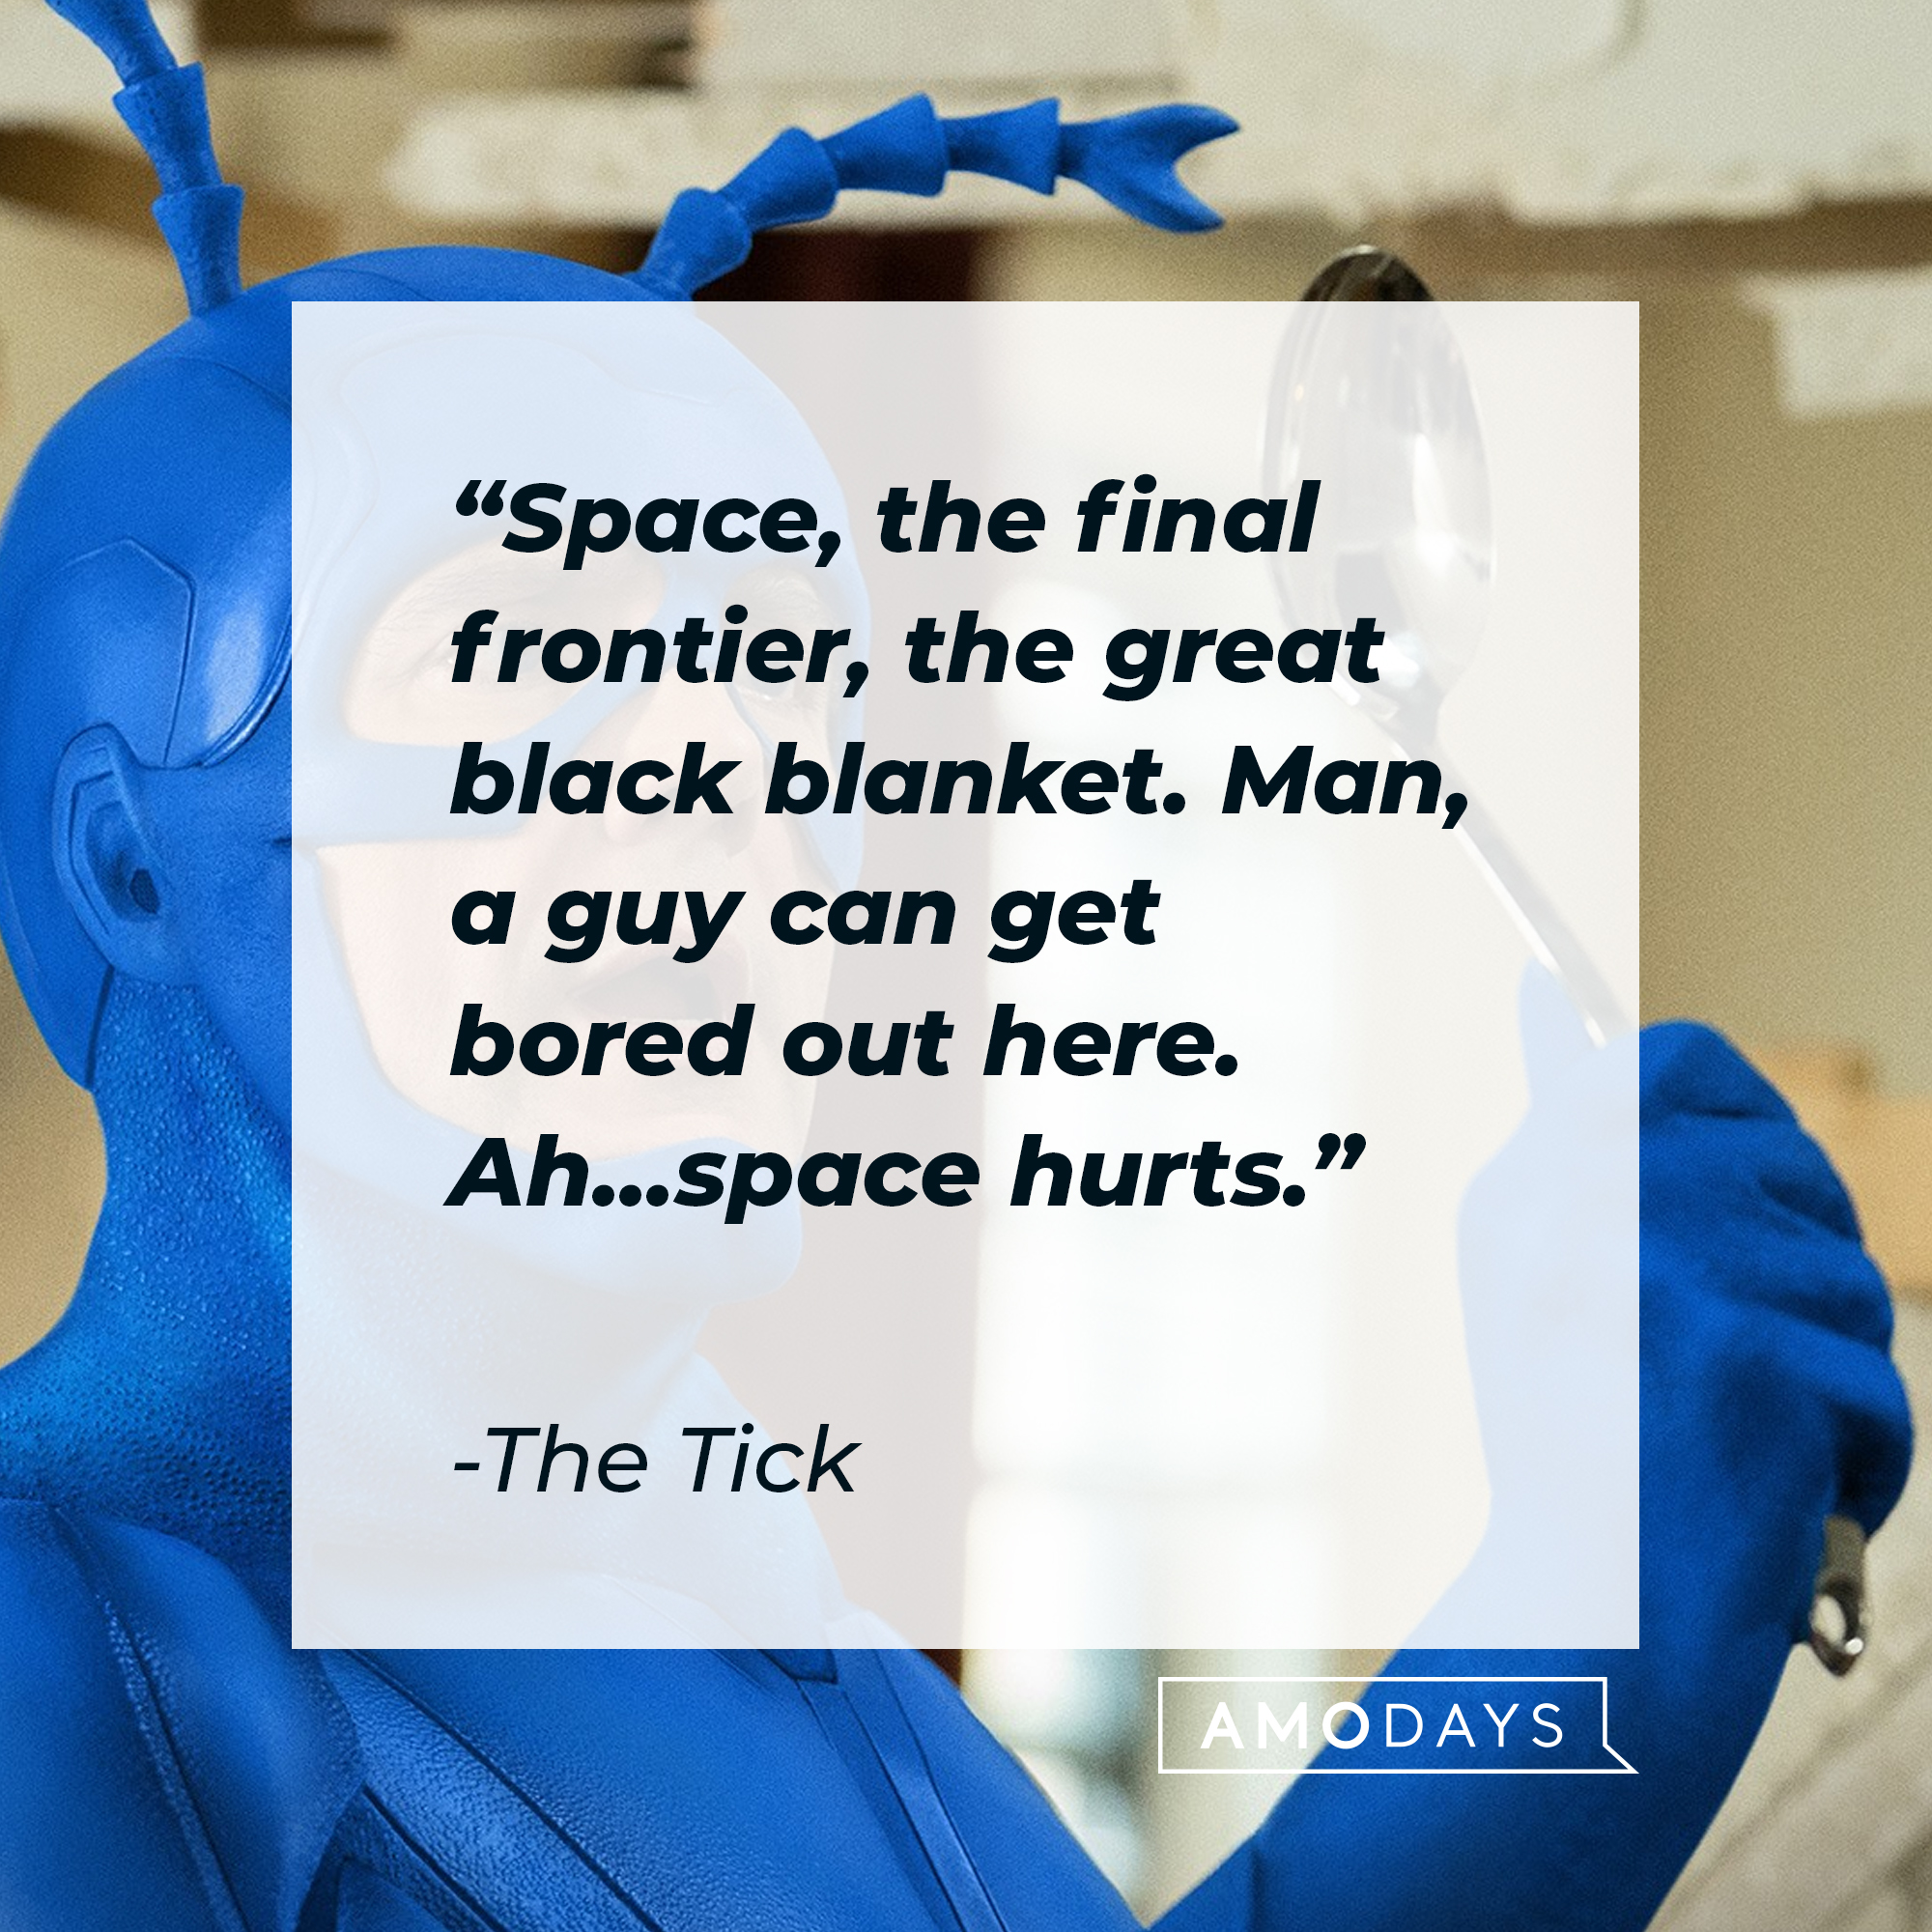 The Tick's quote: "Space, the final frontier, the great black blanket. Man, a guy can get bored out here. Ah...space hurts." | Source: Facebook.com/TheTick